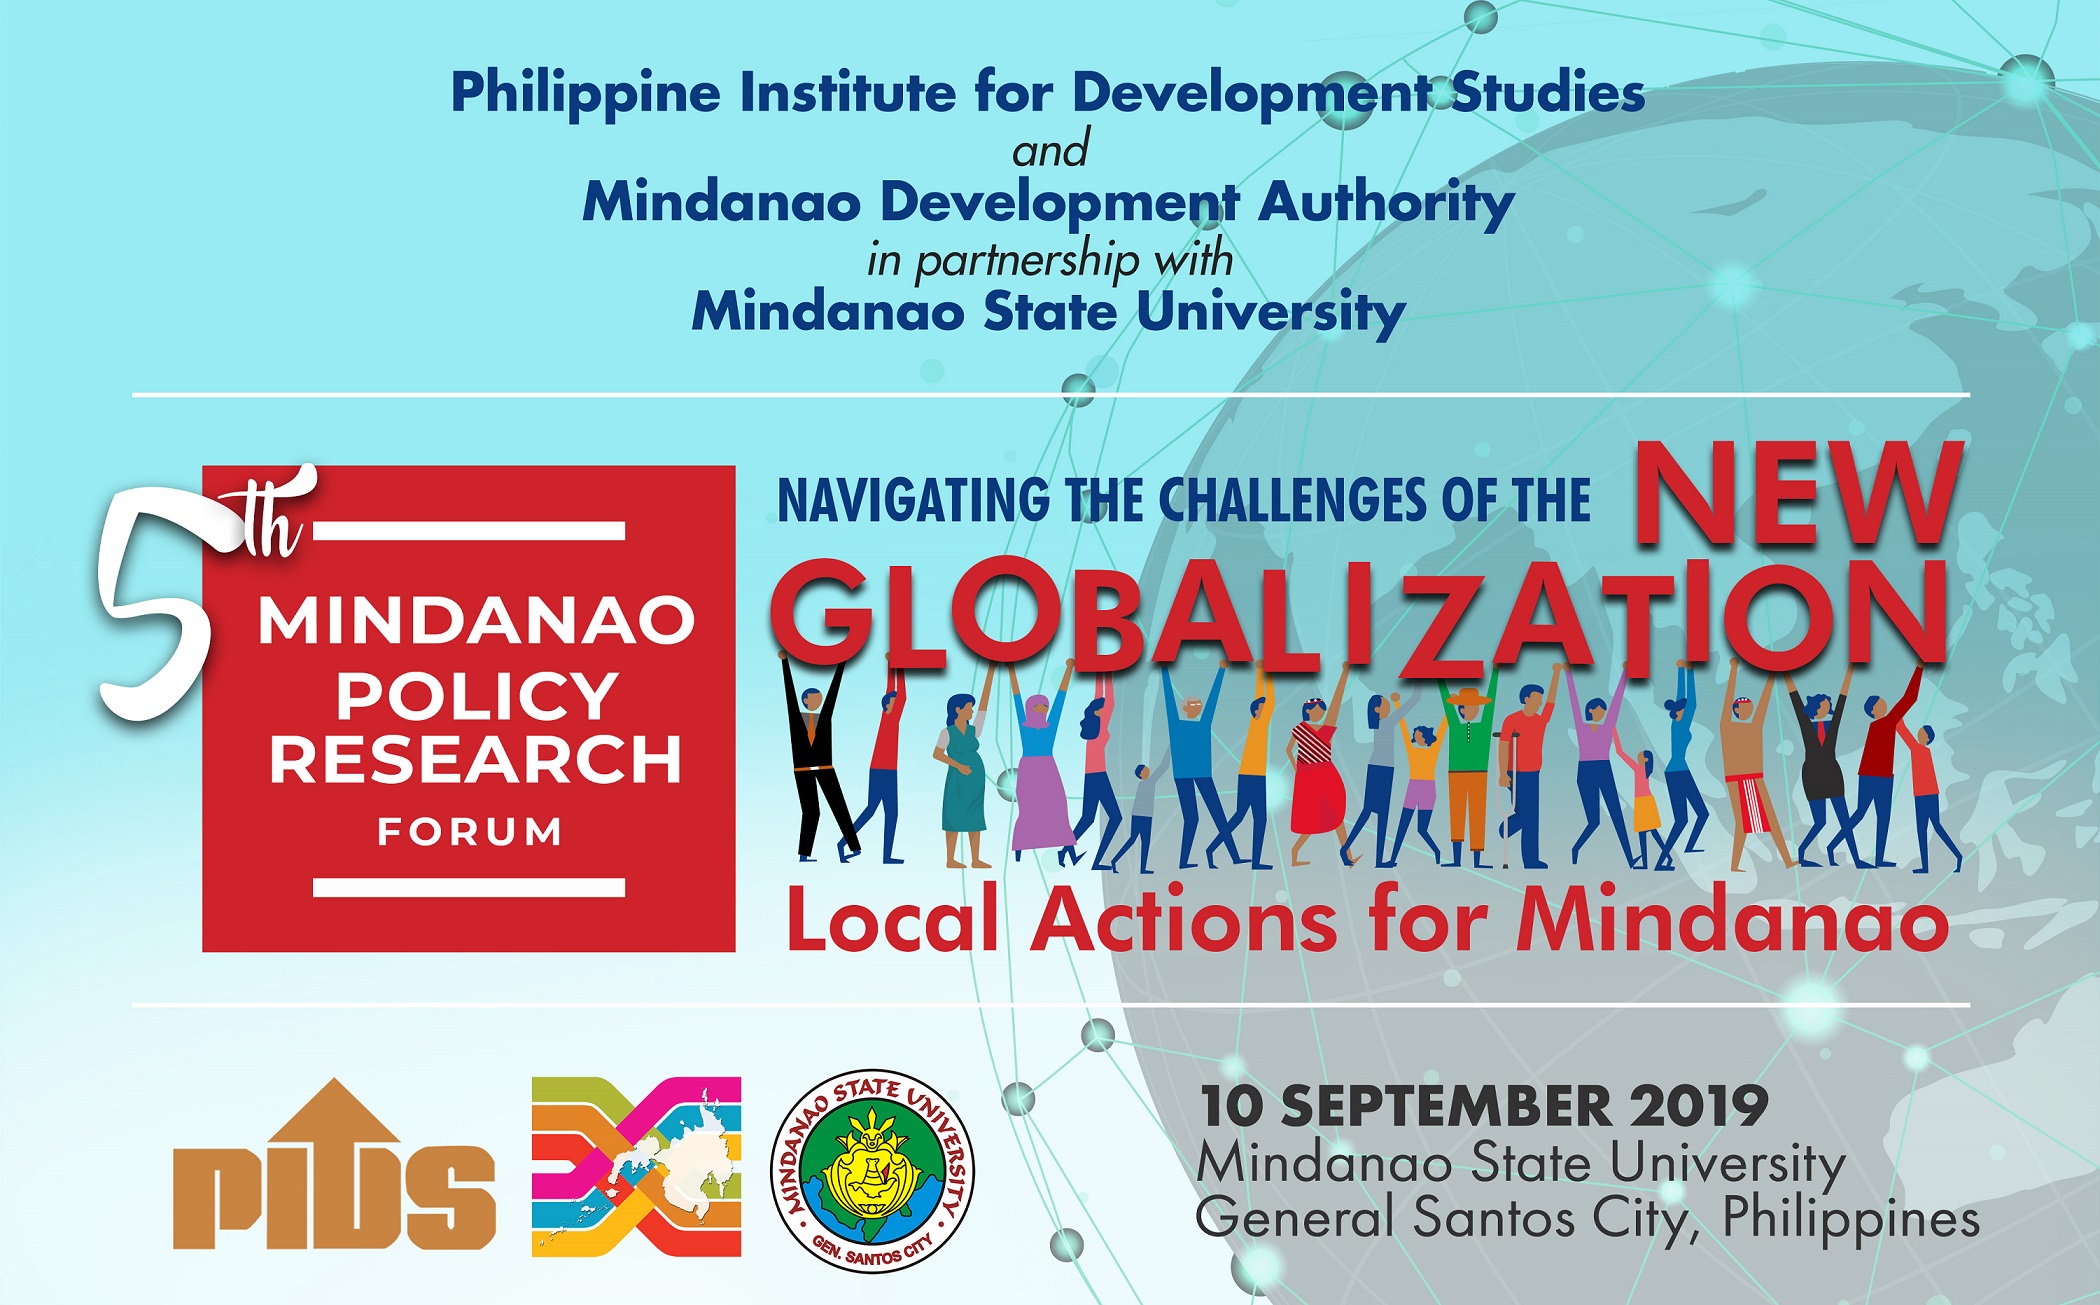 5th Mindanao Policy Research Forum: Navigating the Challenges of the New Globalization: Local Actions for Mindanao-1_streamer_minda_event_actual_4k_size_res.jpg